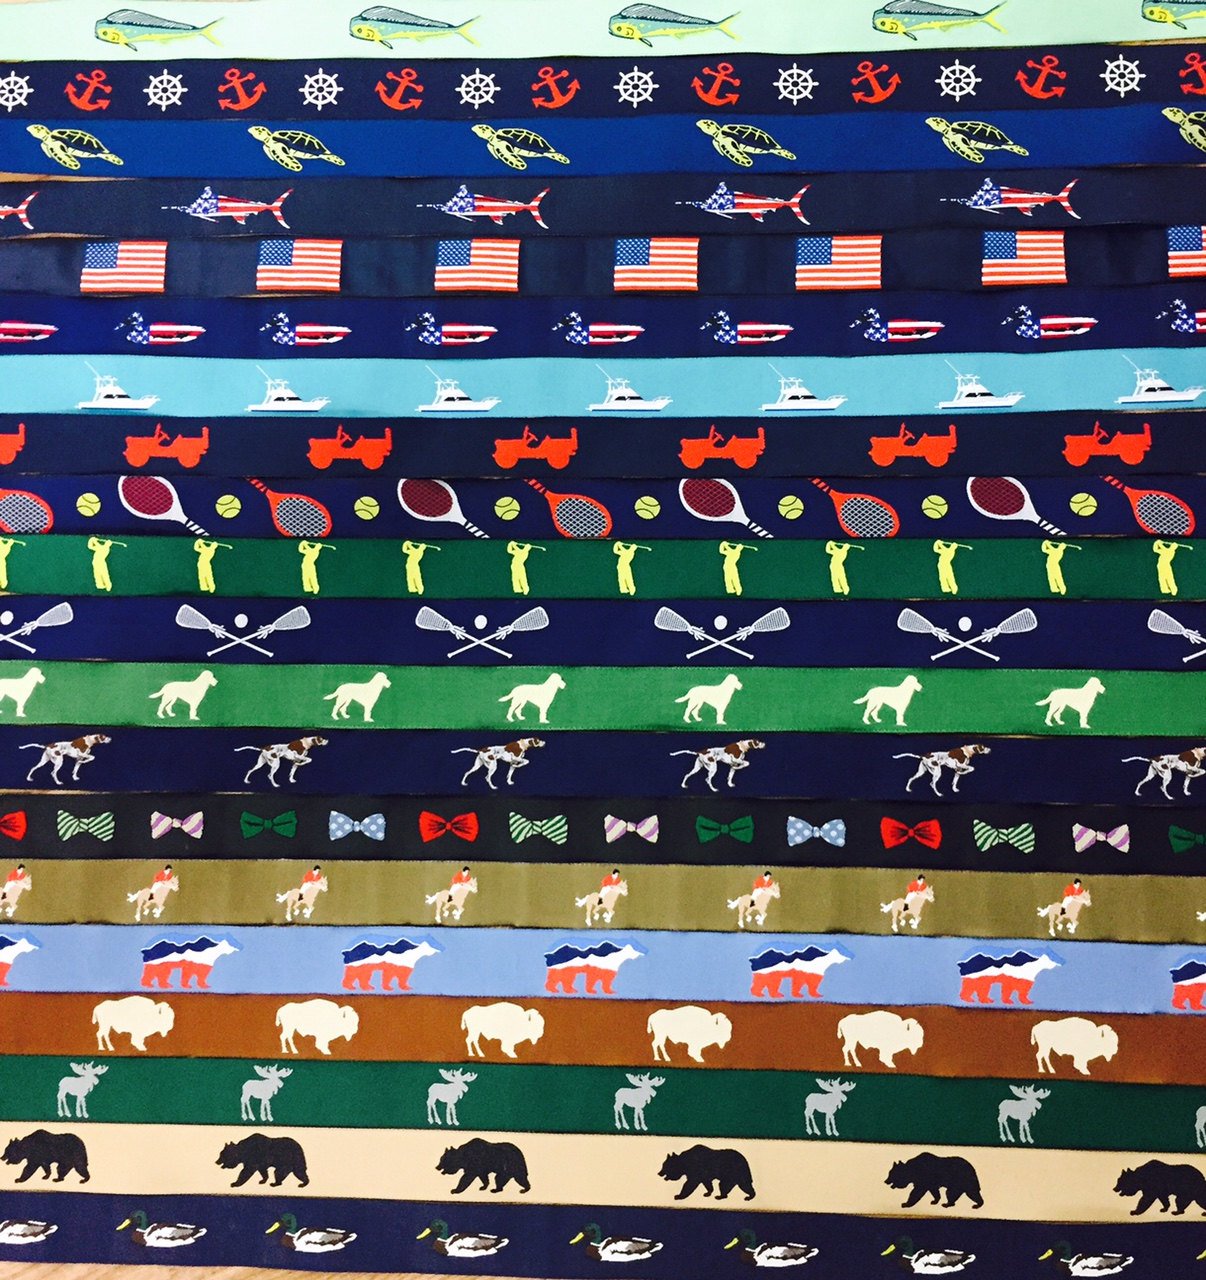 Outdoor ribbon Belts. jeep,lab,bear,horse,bow tie, fishing boat,us flag belts